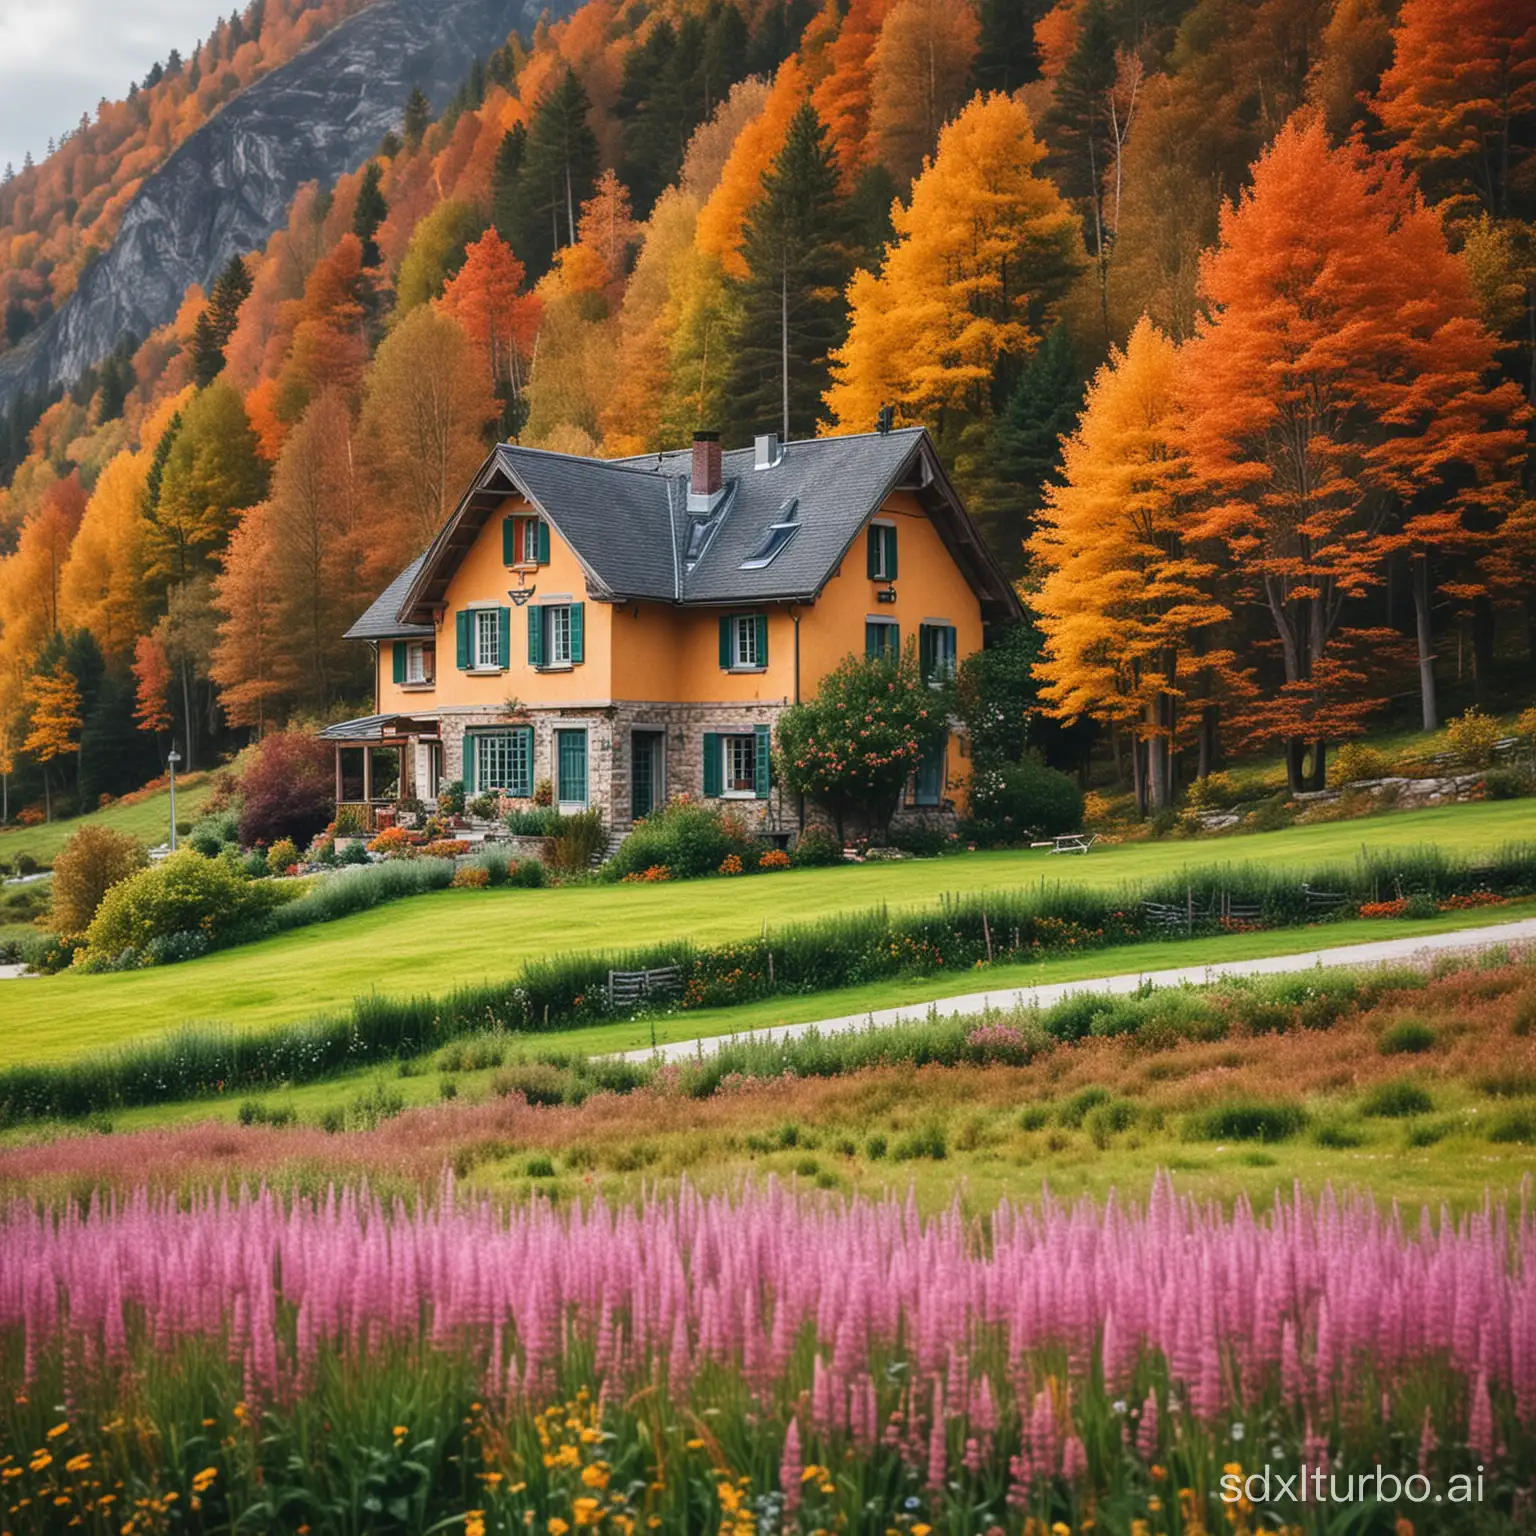 medium house in the middle of a beautiful landscape make it have the landscape blurred and enhance the colors of the house